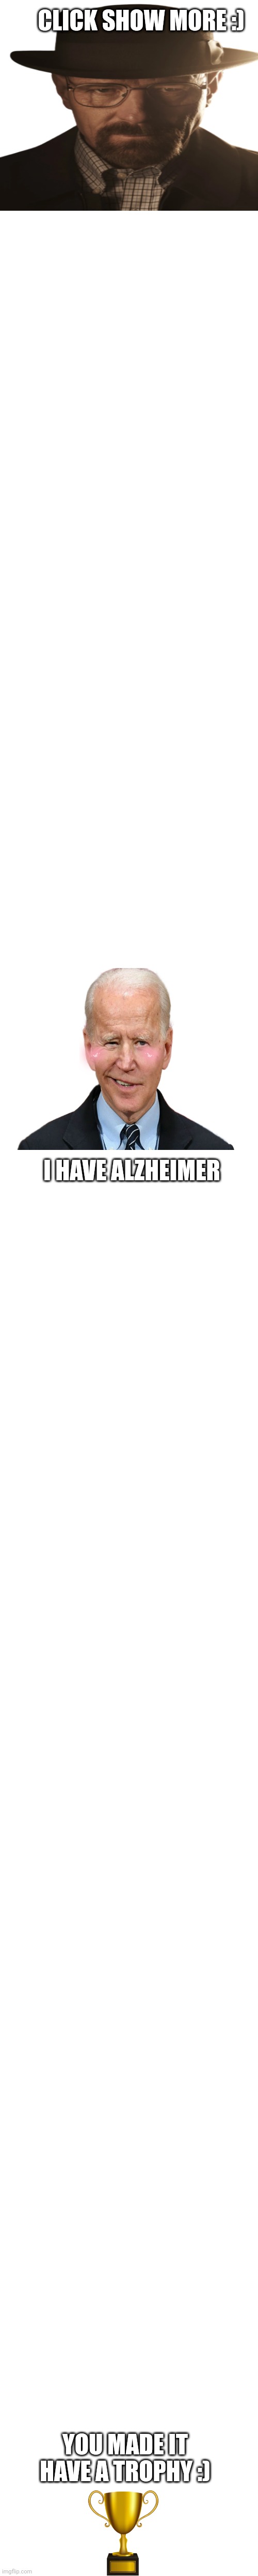 CLICK SHOW MORE :); I HAVE ALZHEIMER; YOU MADE IT HAVE A TROPHY :) | made w/ Imgflip meme maker